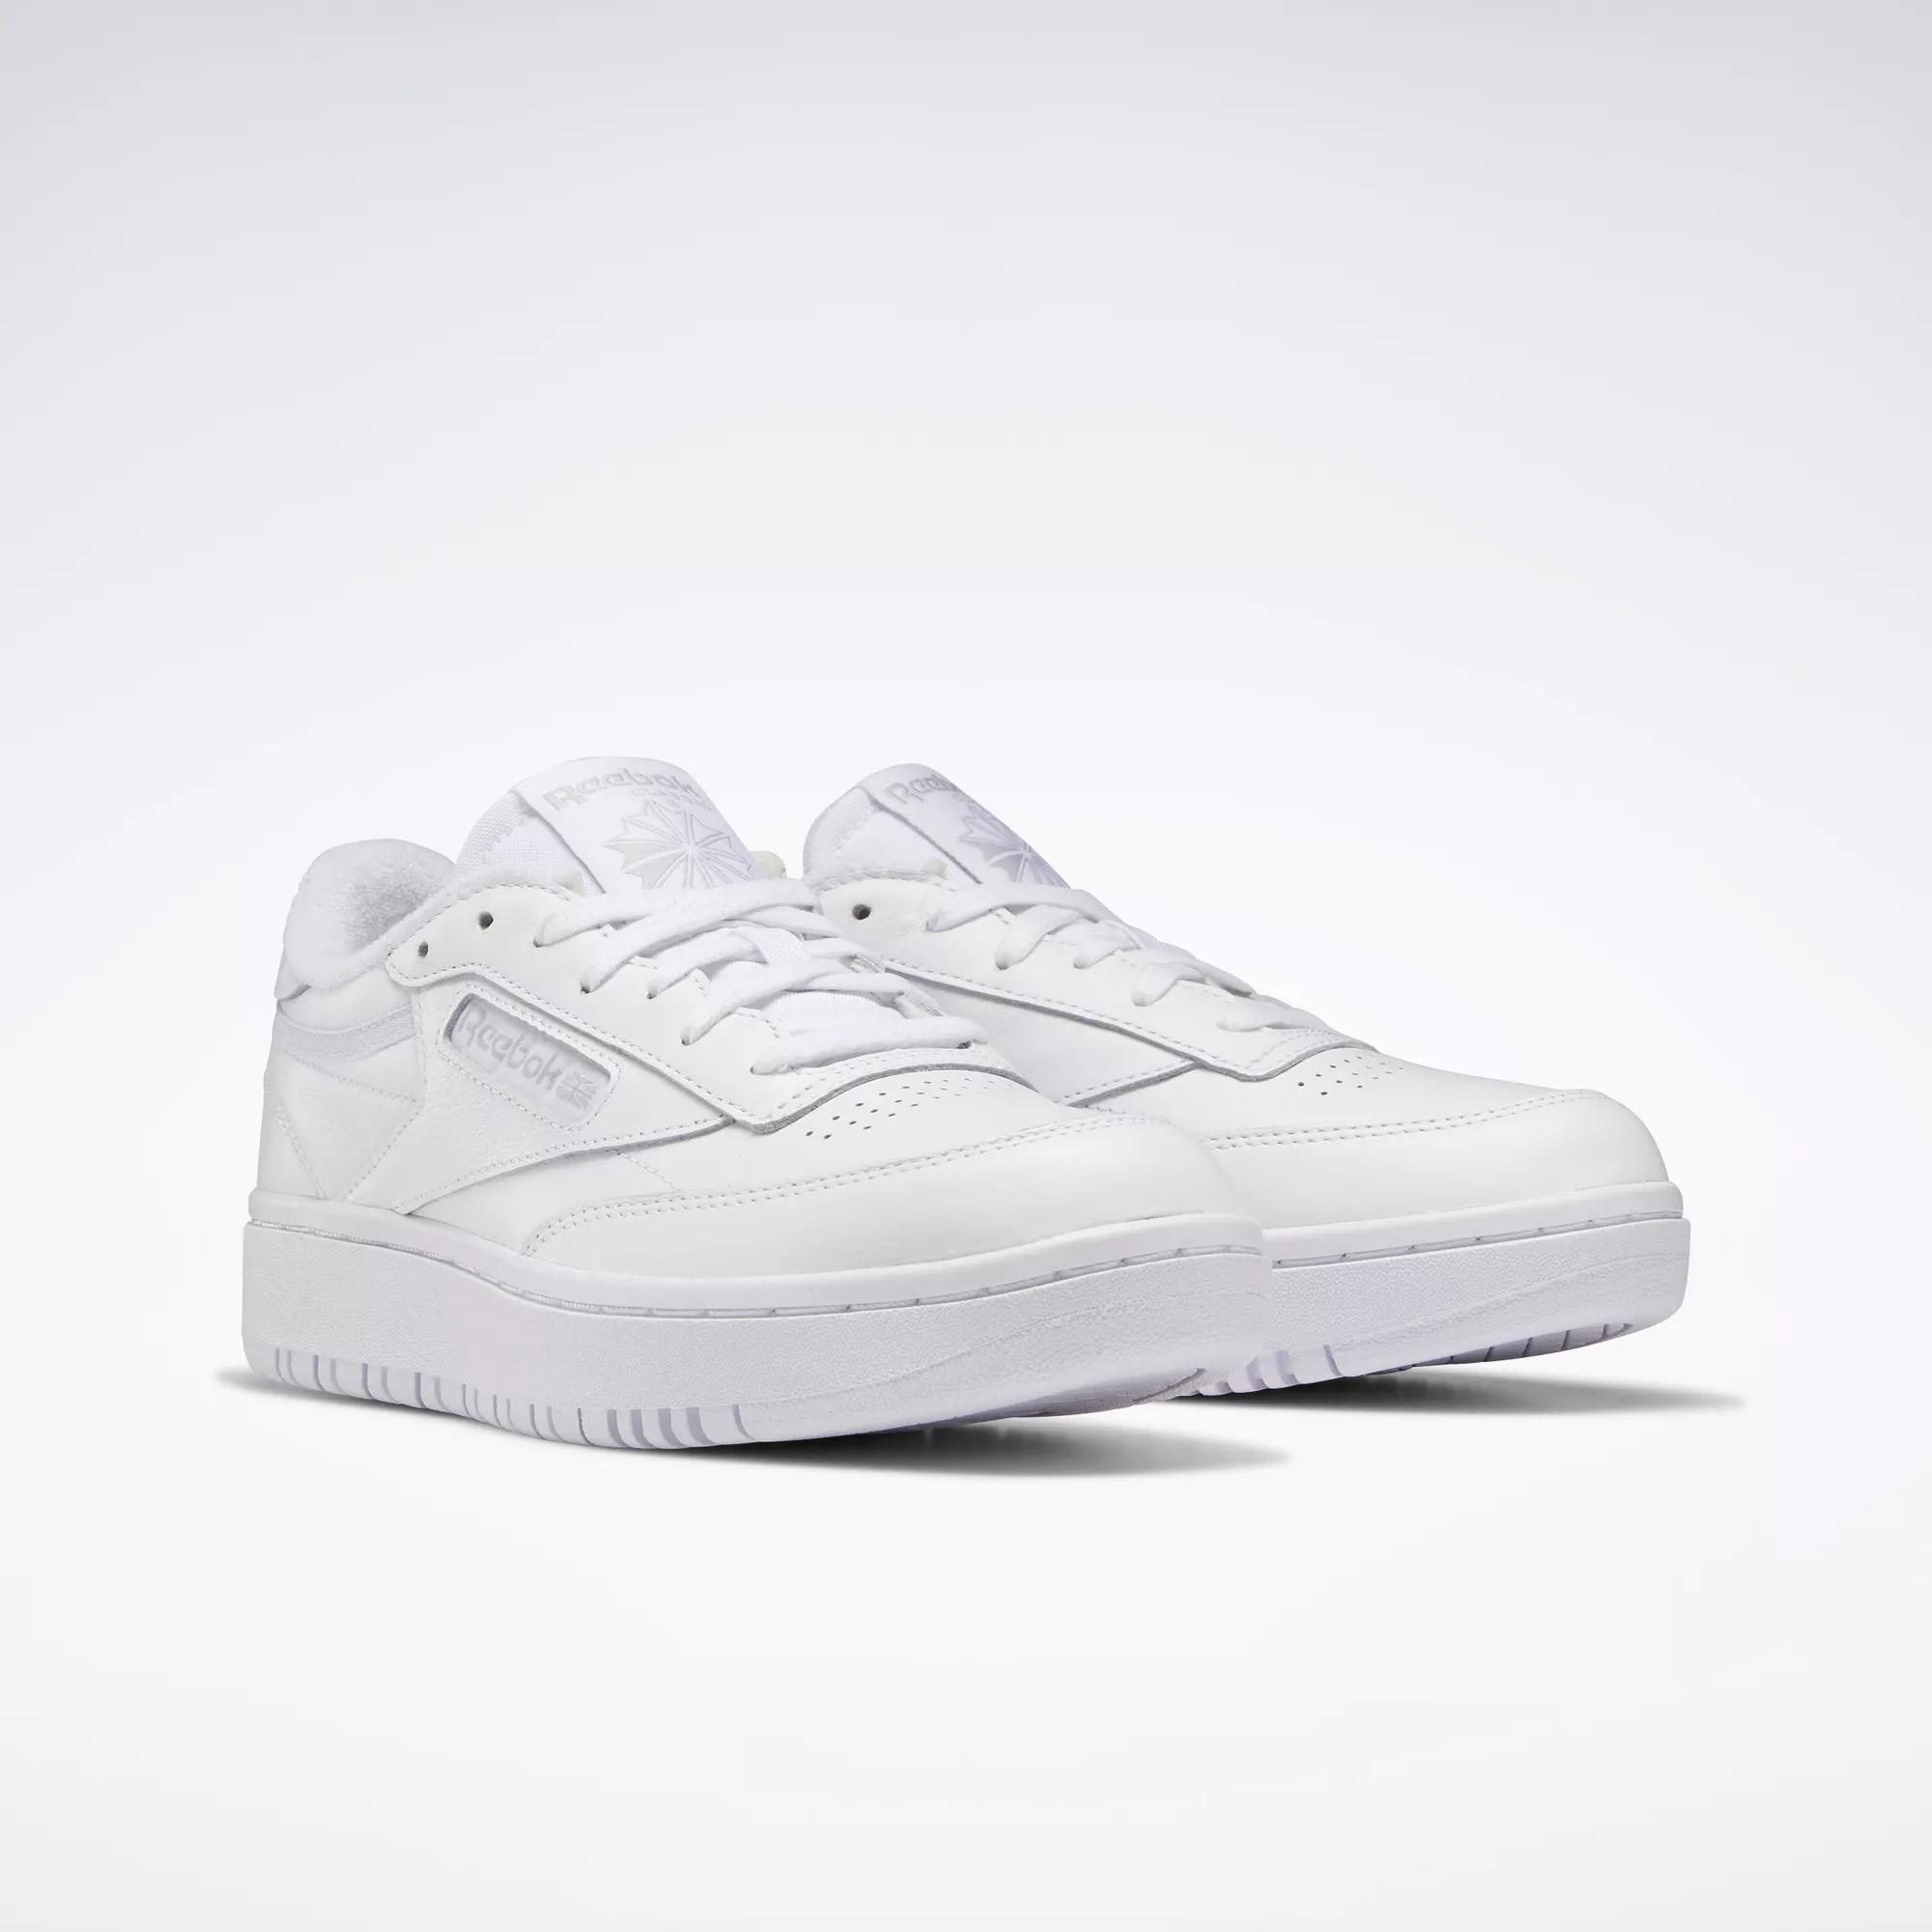 Club C Double Women's Shoes - Ftwr White / Ftwr White / Cold Grey